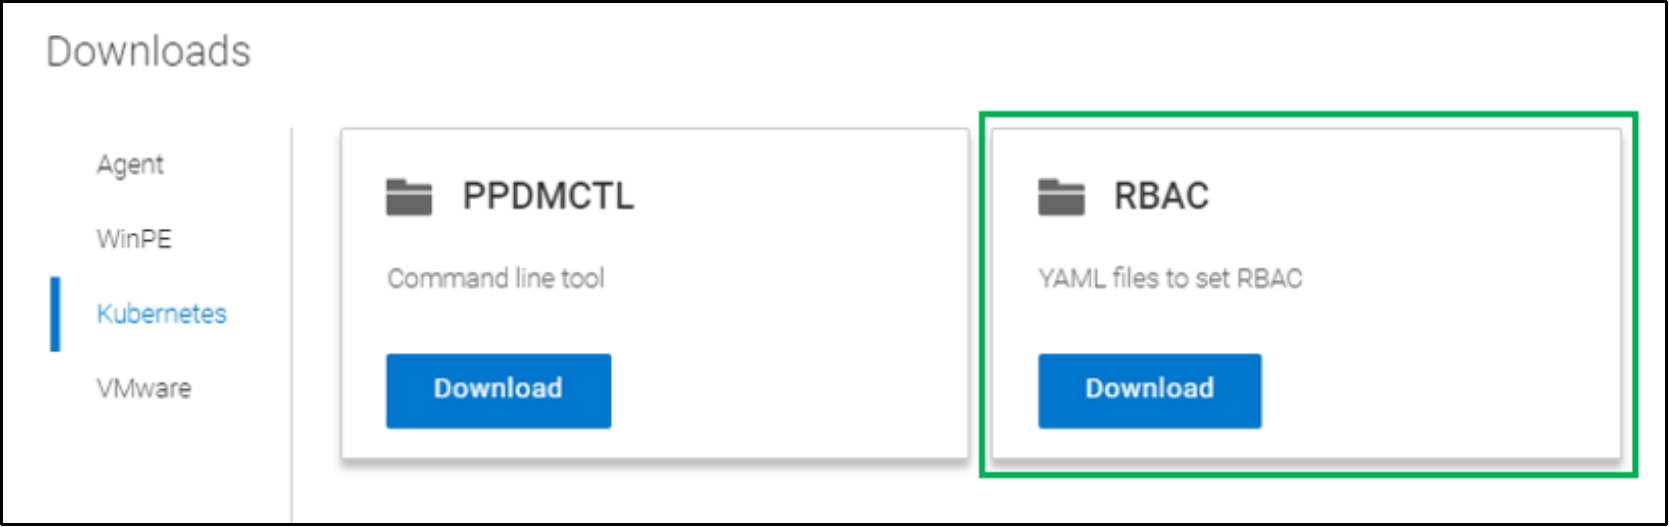 This image shows the option to download the RBAC YAML files from UI.